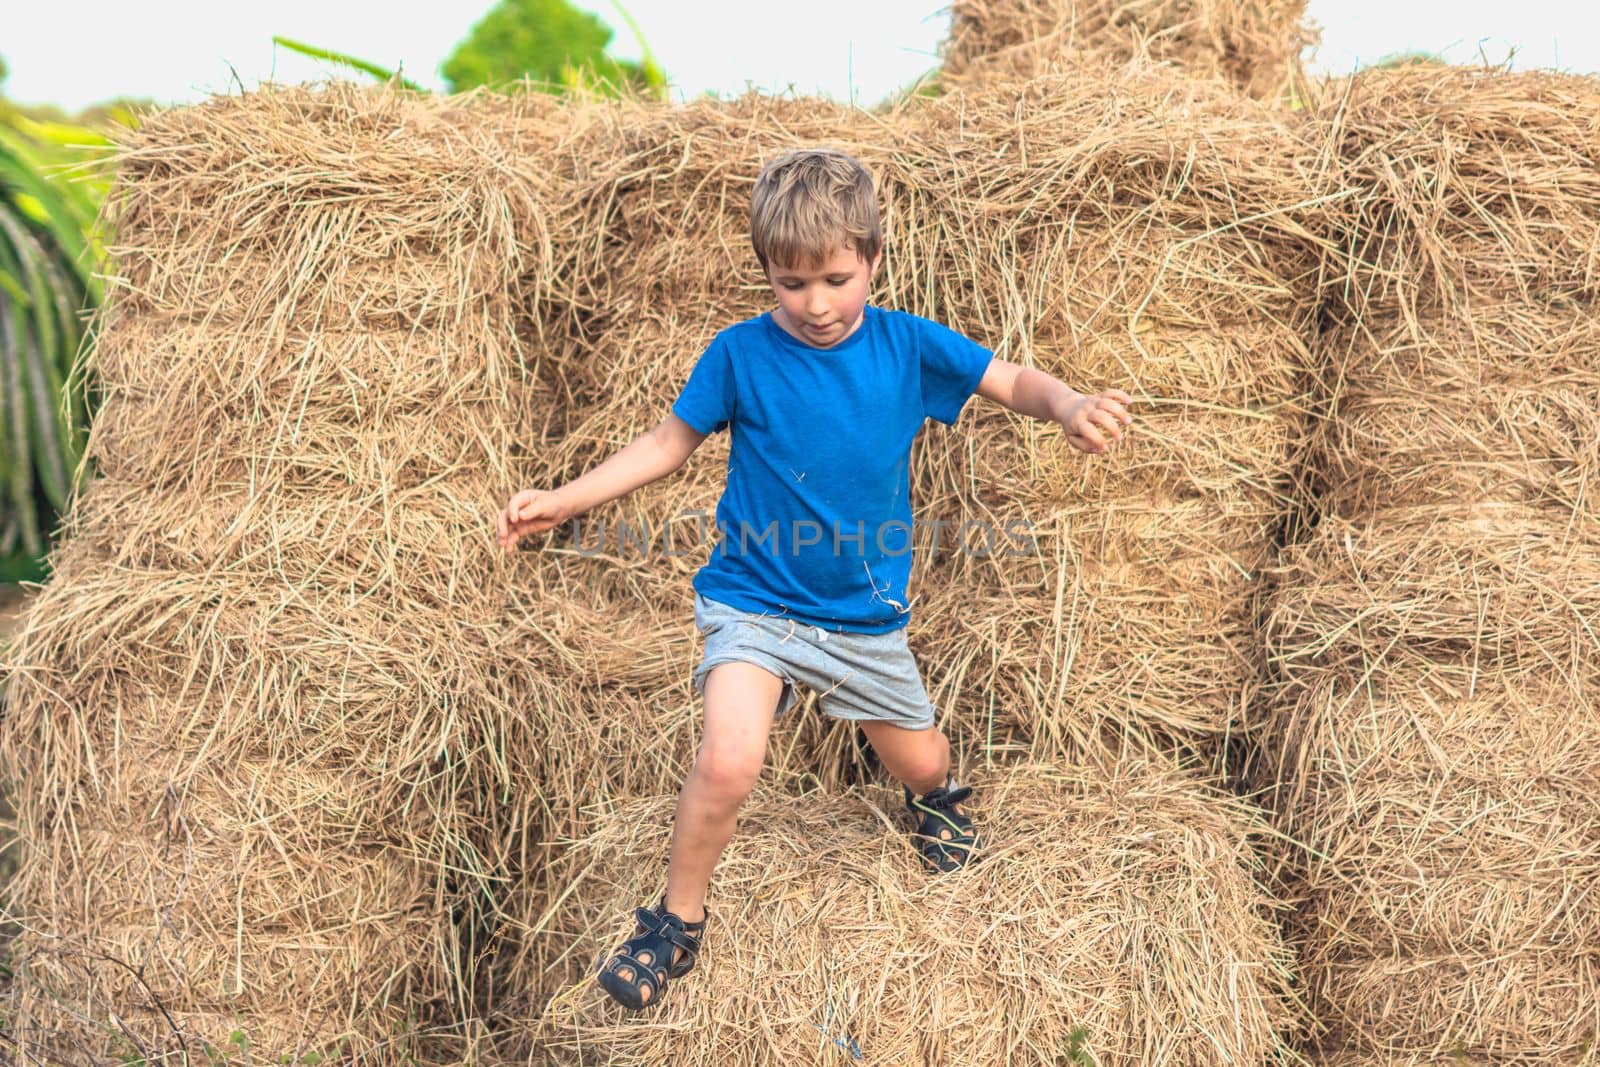 Boy blue t-shirt smile play climbs on down haystack bales of dry hay, clear sky sunny day. Outdoor kid children summer leisure activities. Concept happy childhood countryside, air close to nature by nandrey85